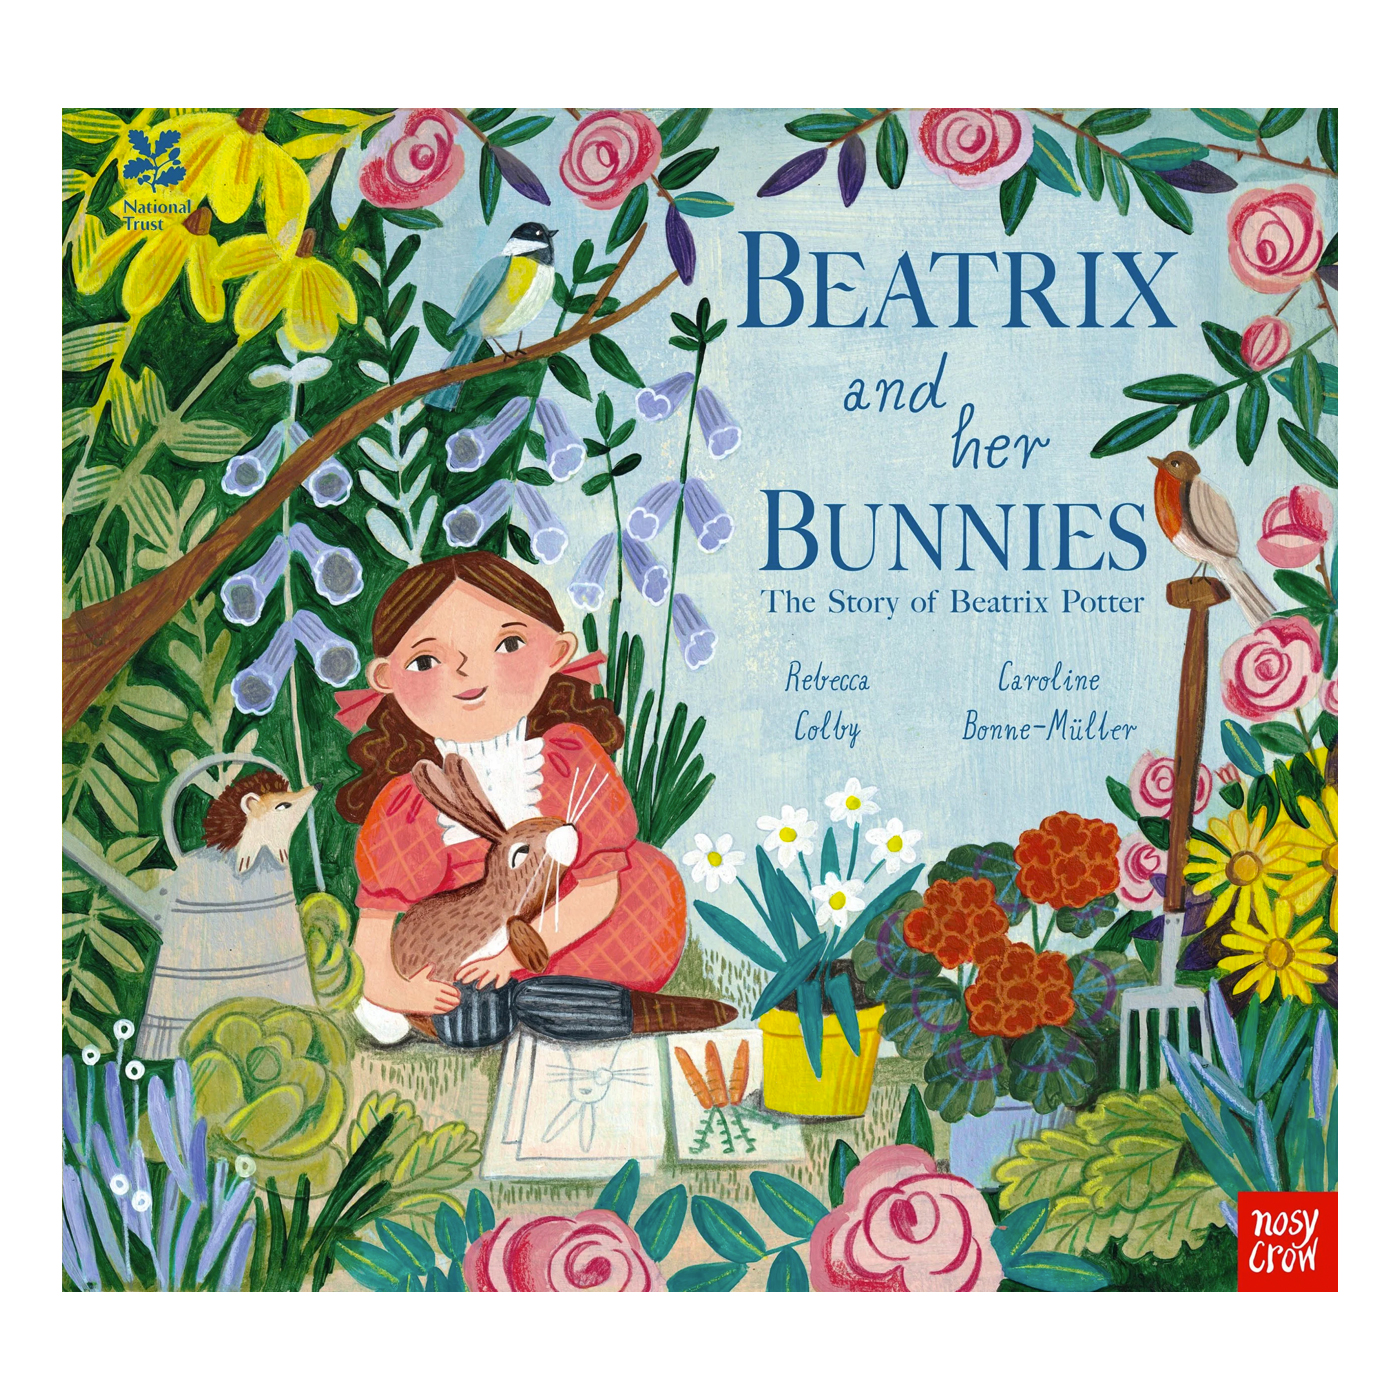  National Trust: Beatrix and her Bunnies